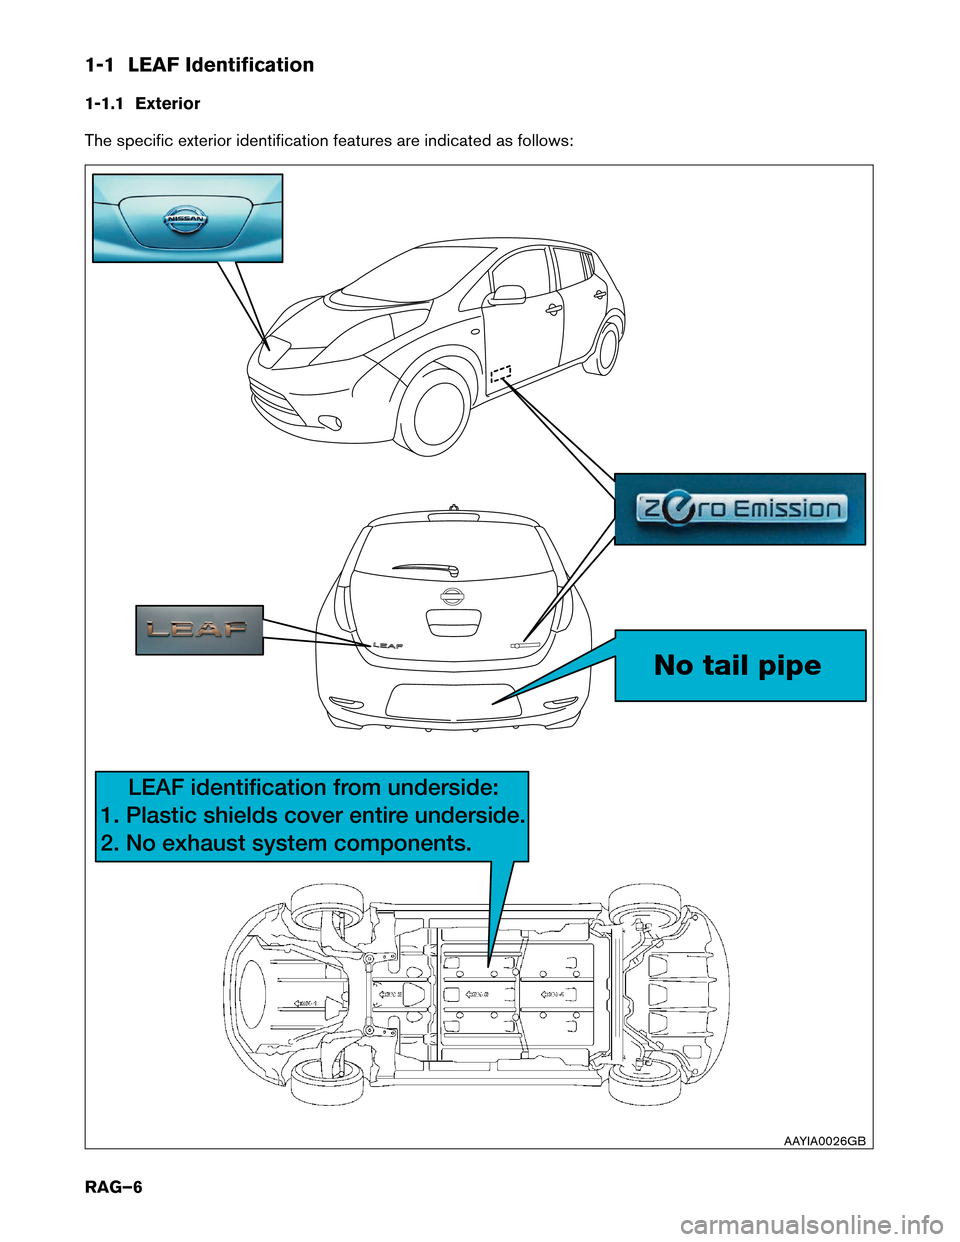 NISSAN LEAF 2015 1.G Roadside Assistance Guide 1-1 LEAF Identification
1-1.1
Exterior
The specific exterior identification features are indicated as follows: No tail pipe
LEAF identification from underside:
1. Plastic shields cover entir
 e under